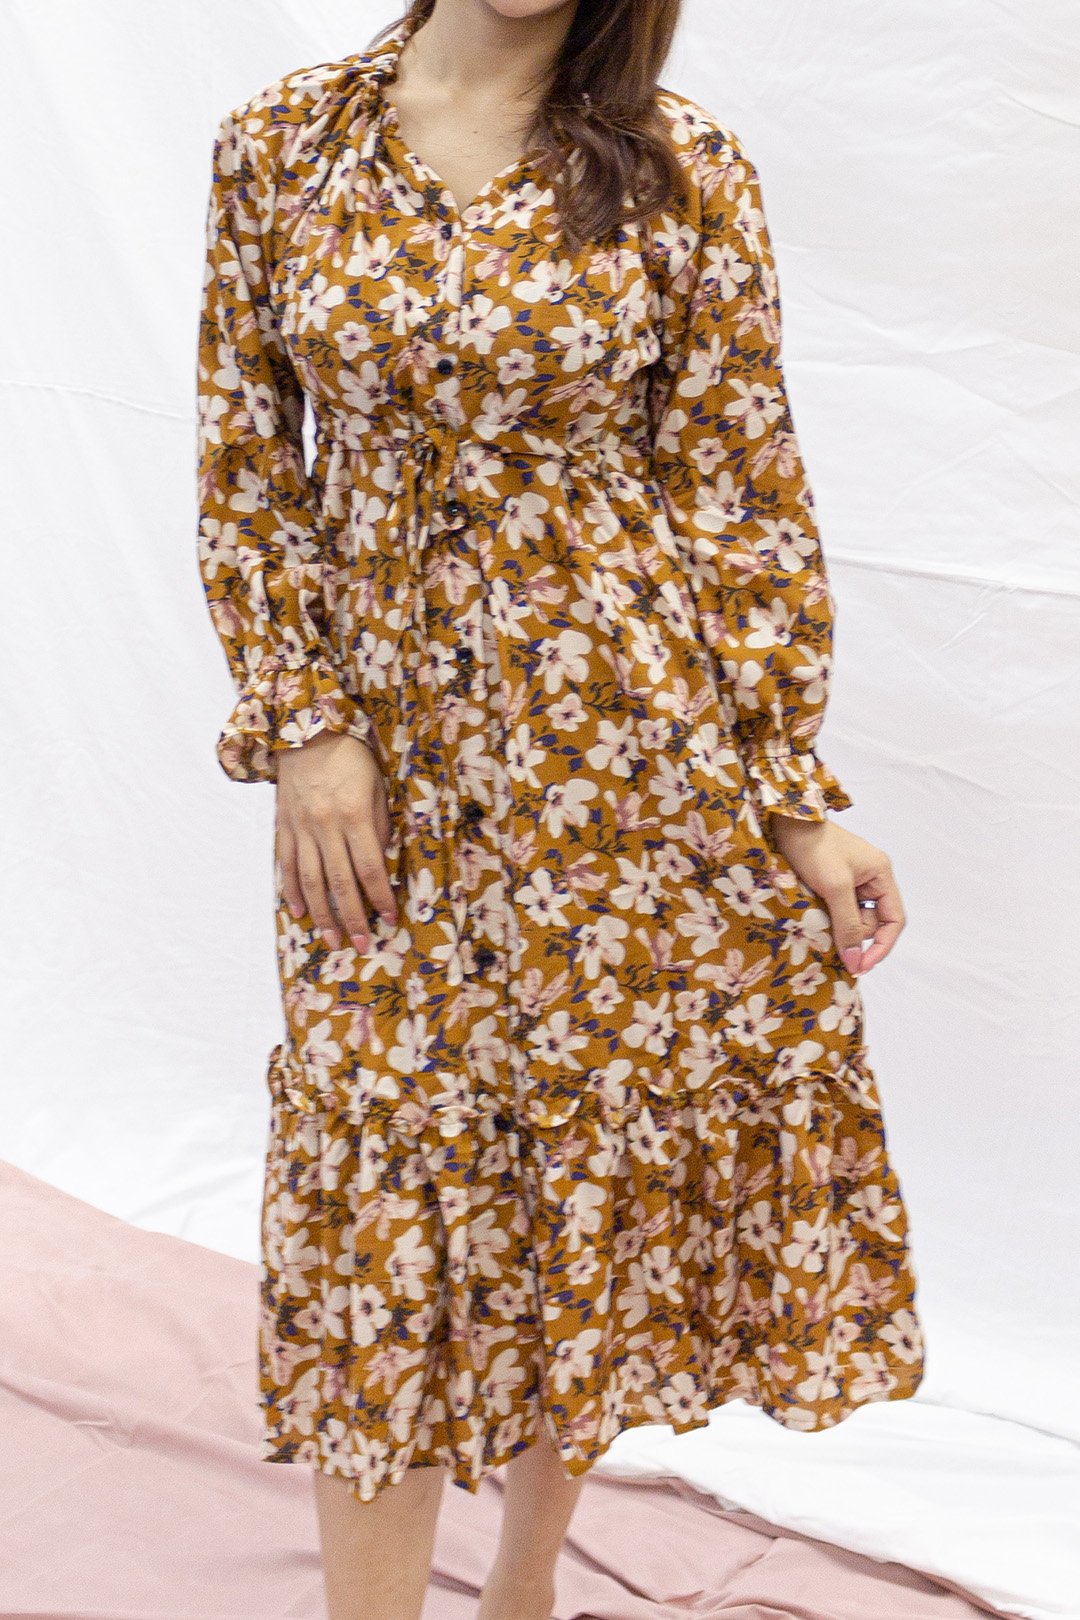 Long sleeve maxi dress with ruffle bottom, features a waist tie to bring in waist shape.